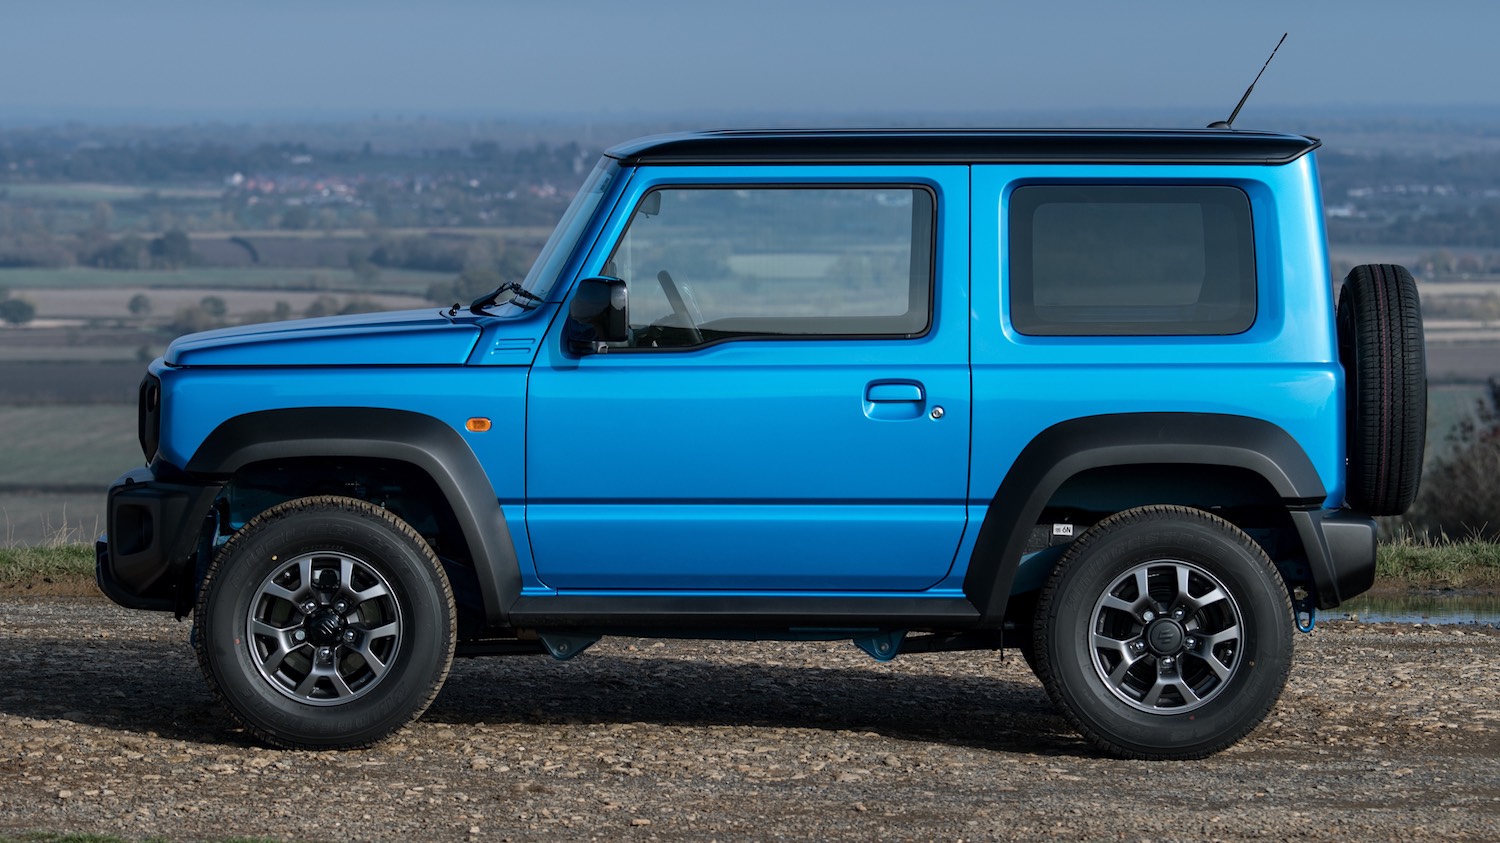 Tom Scanlan takes the All-New Jimny on and off-road 5